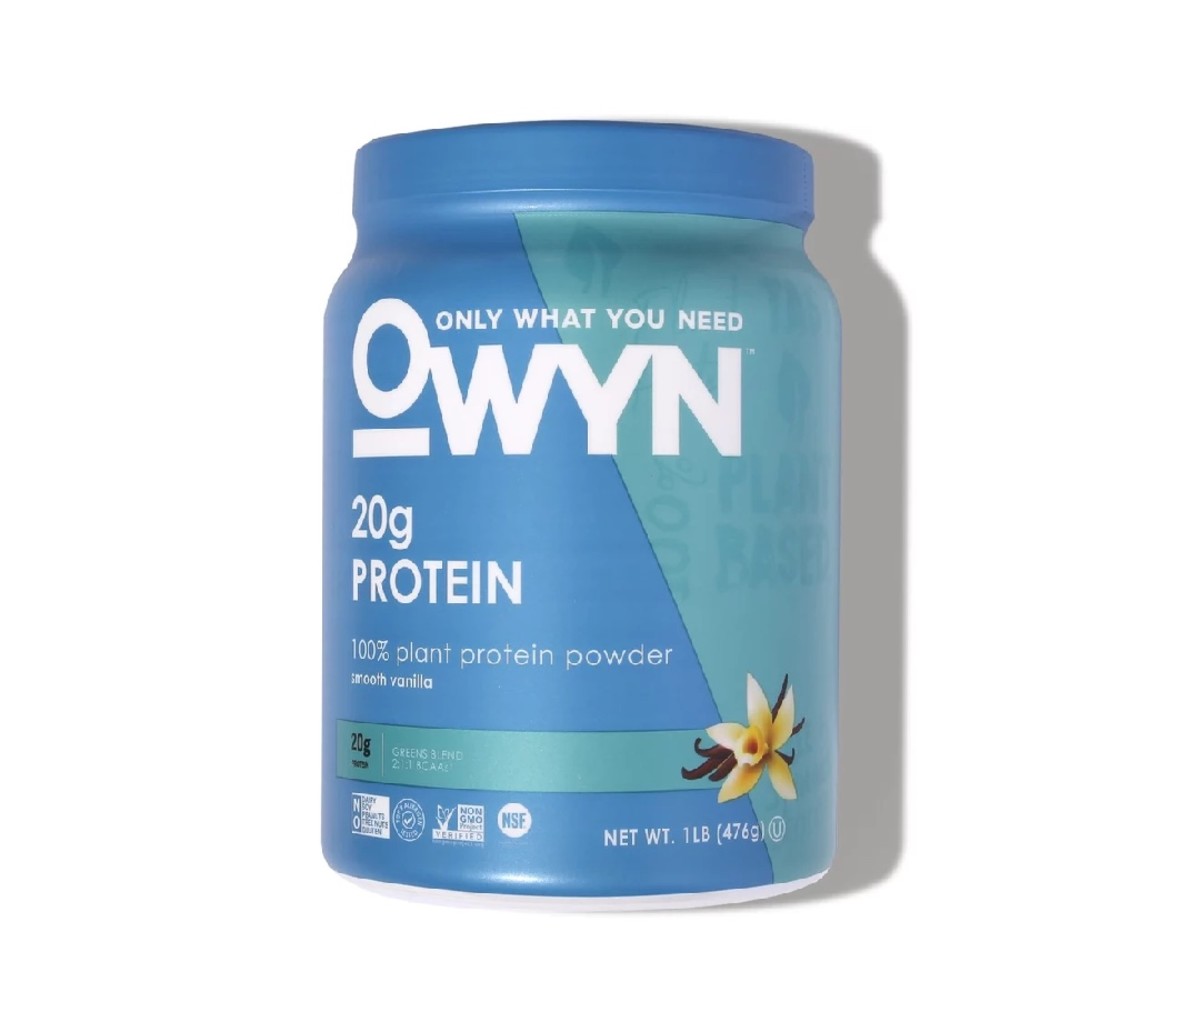 OWYN offers a plant-based clean protein powder which provides 20 grams of protein from pea, pumpkin, and chia seeds.